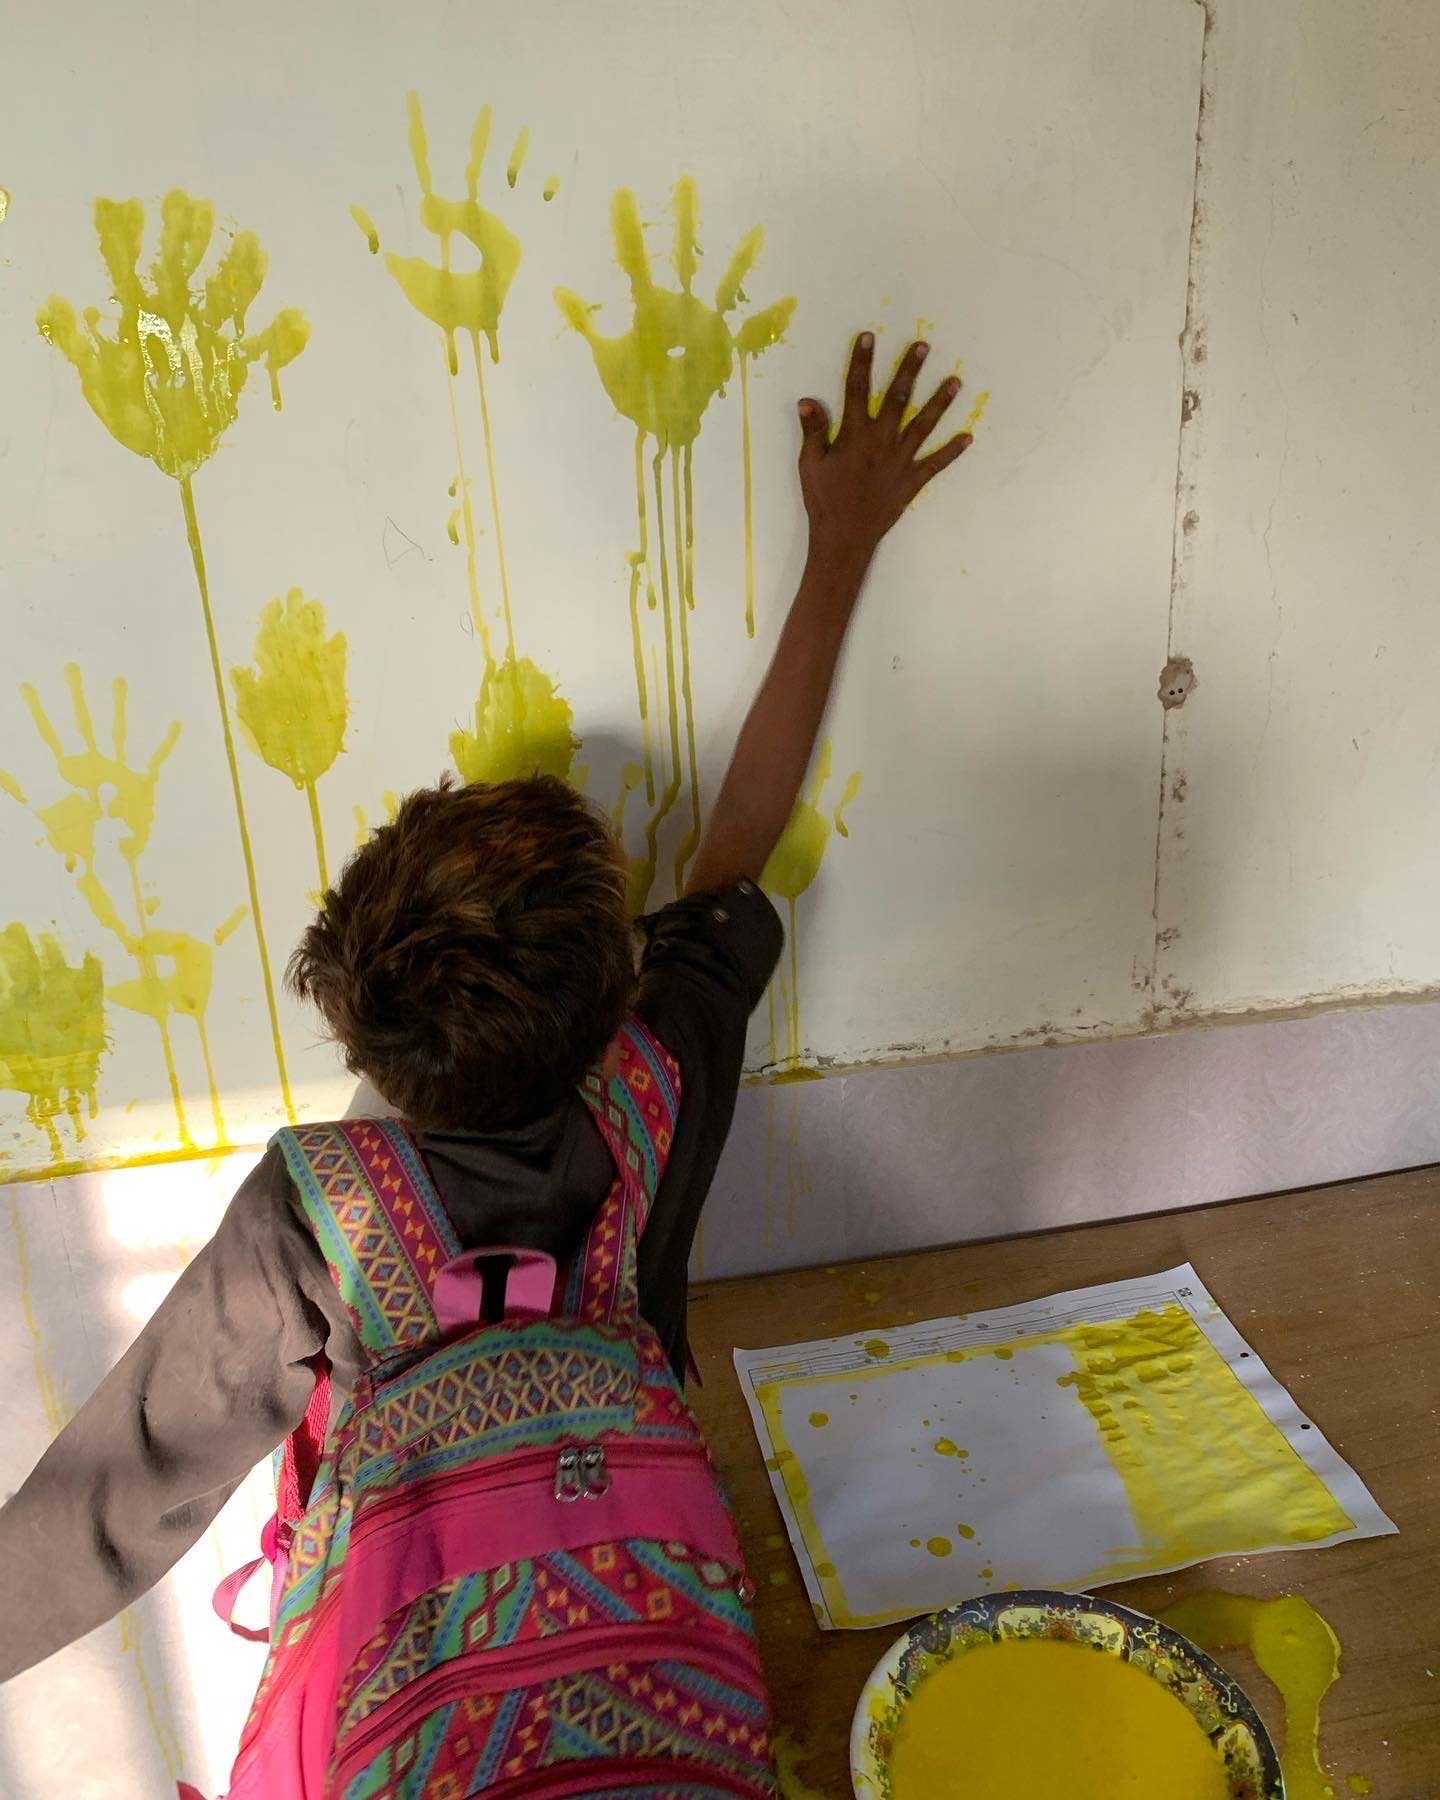 A student paints the schools wall with his handprints. — Photo by Sufiyan Ahamd